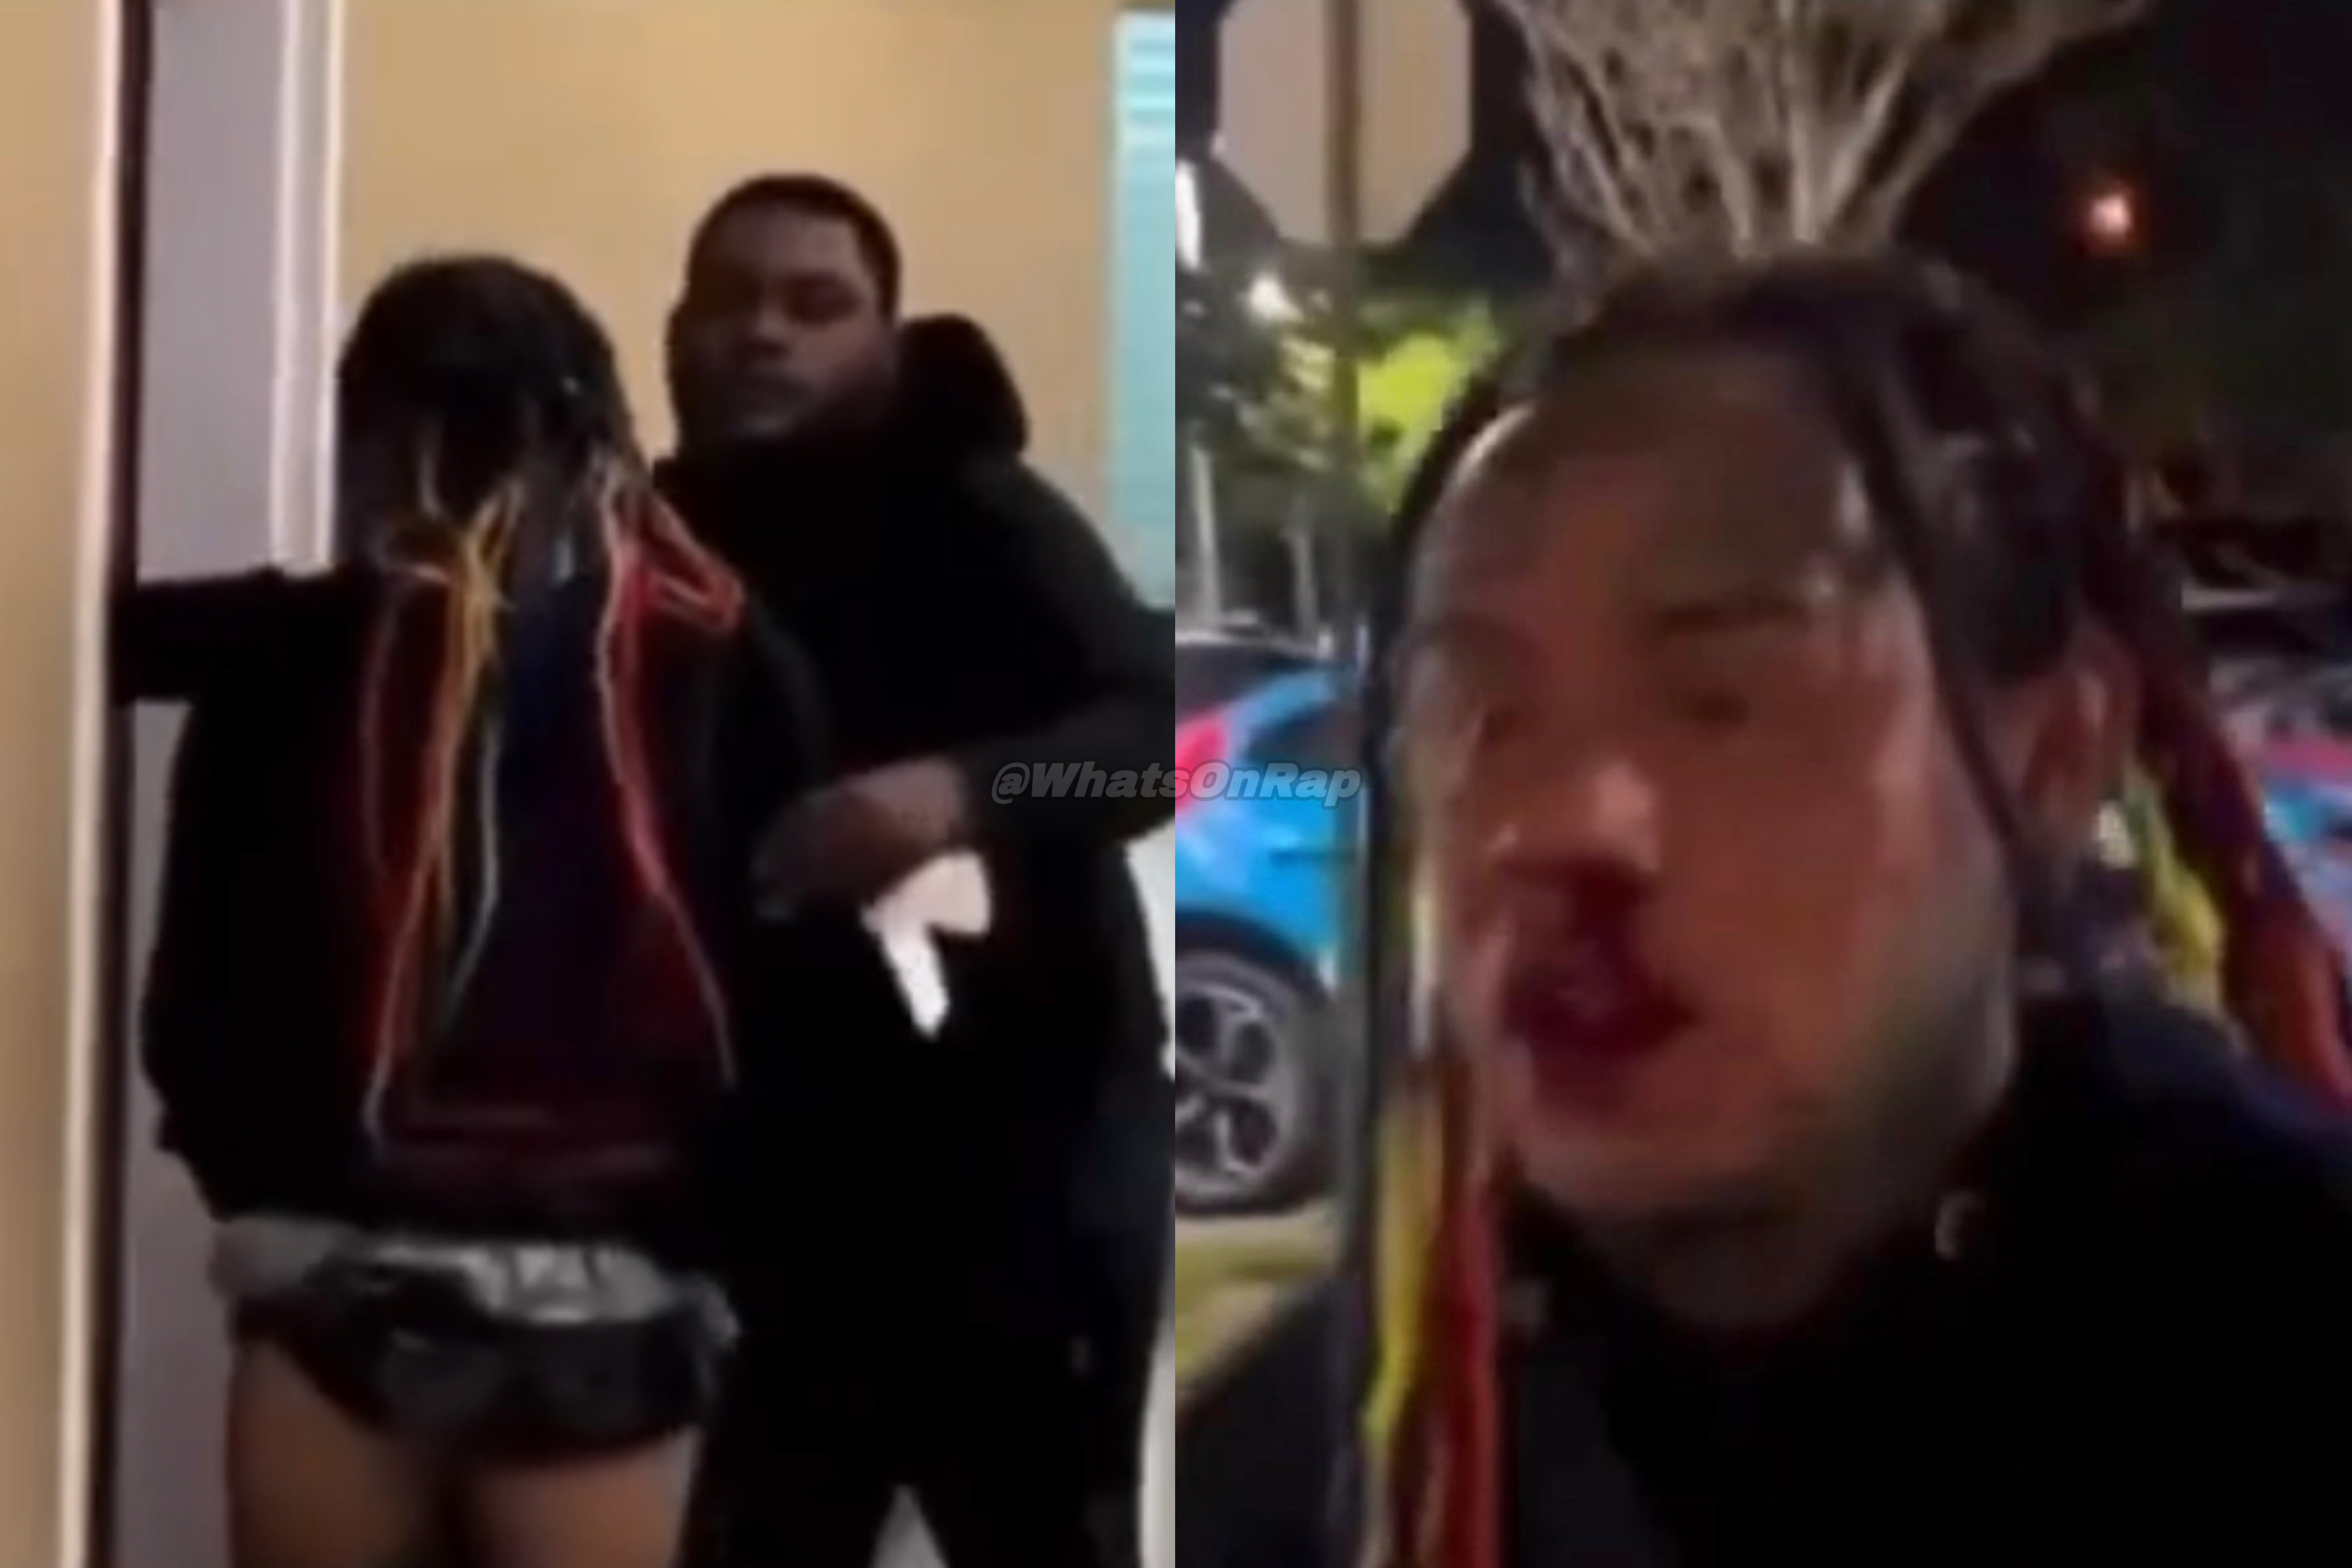 New Footage Of The Aftermath Of 6ix9ine Getting Jumped Surfaces